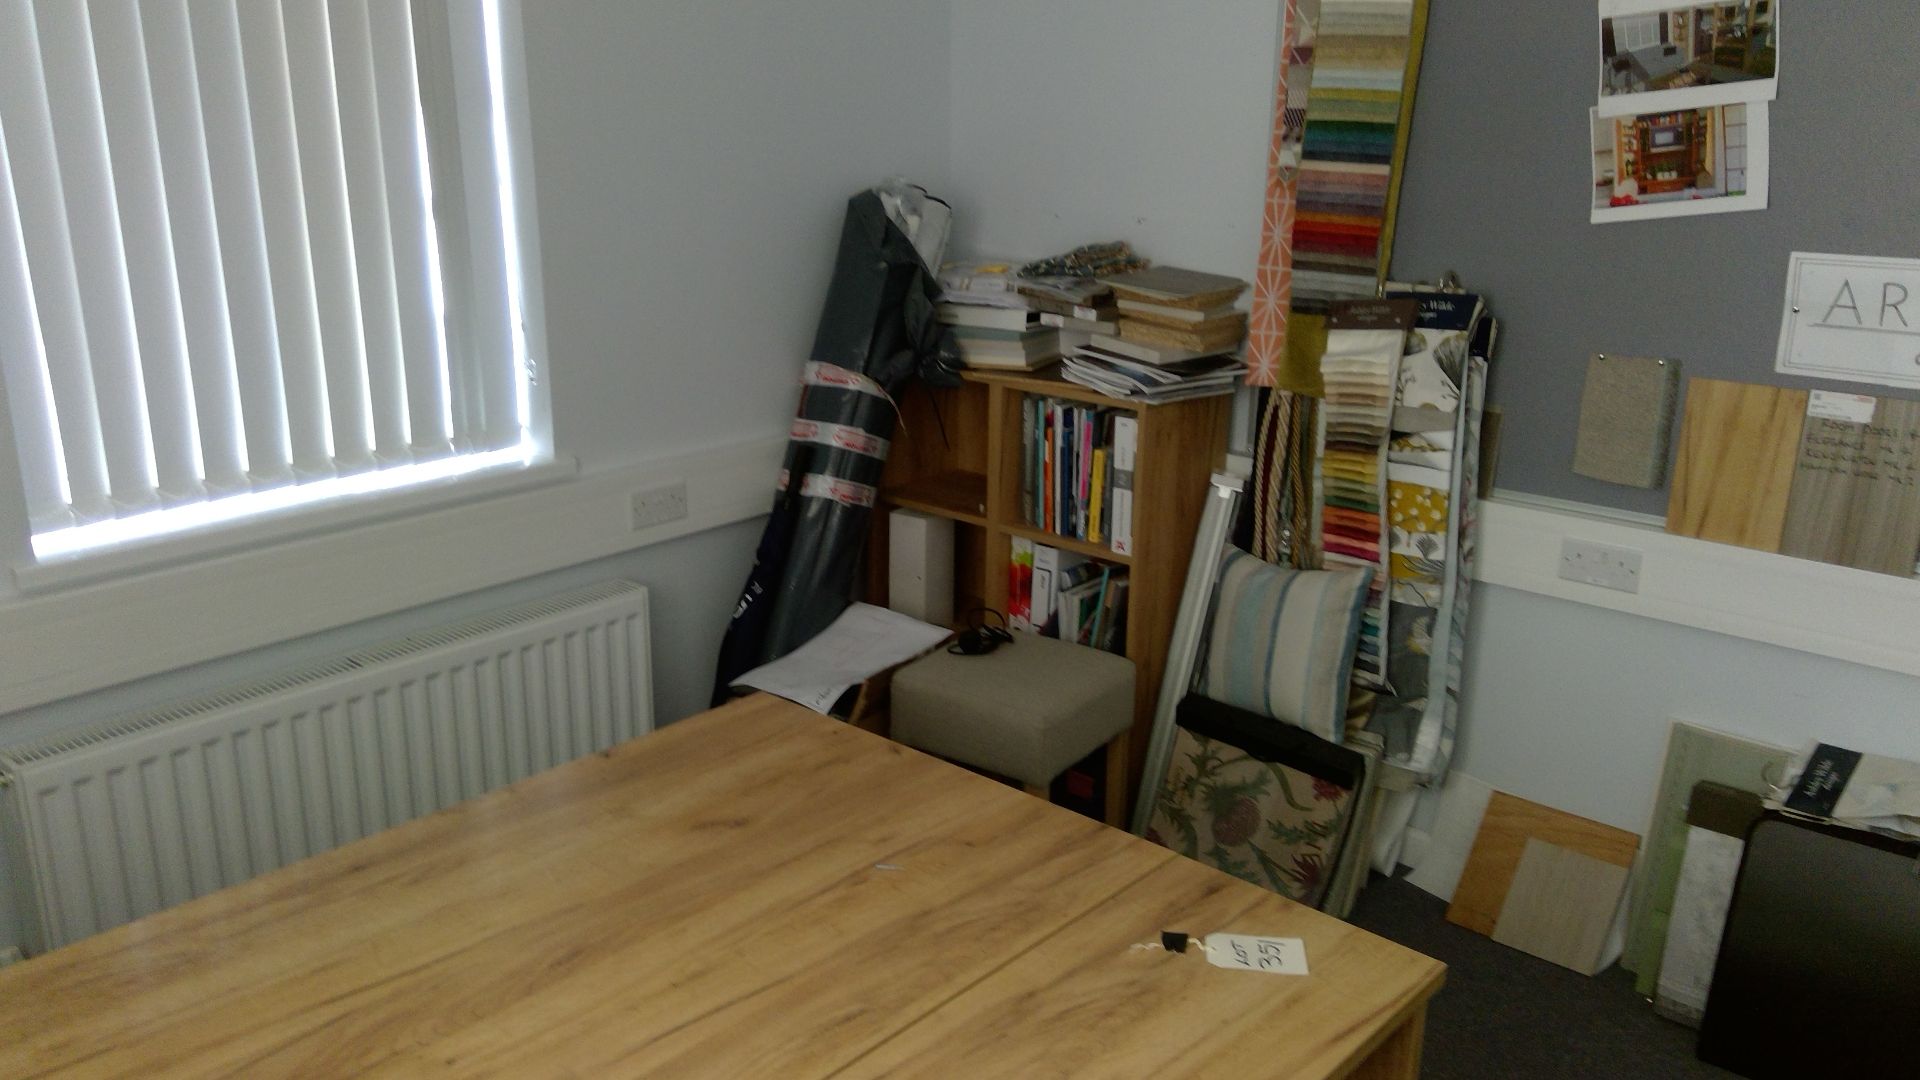 Contents of office 9 to include oak effect single pedestal desk with extension, 4 bookcases, 2 chair - Image 2 of 2